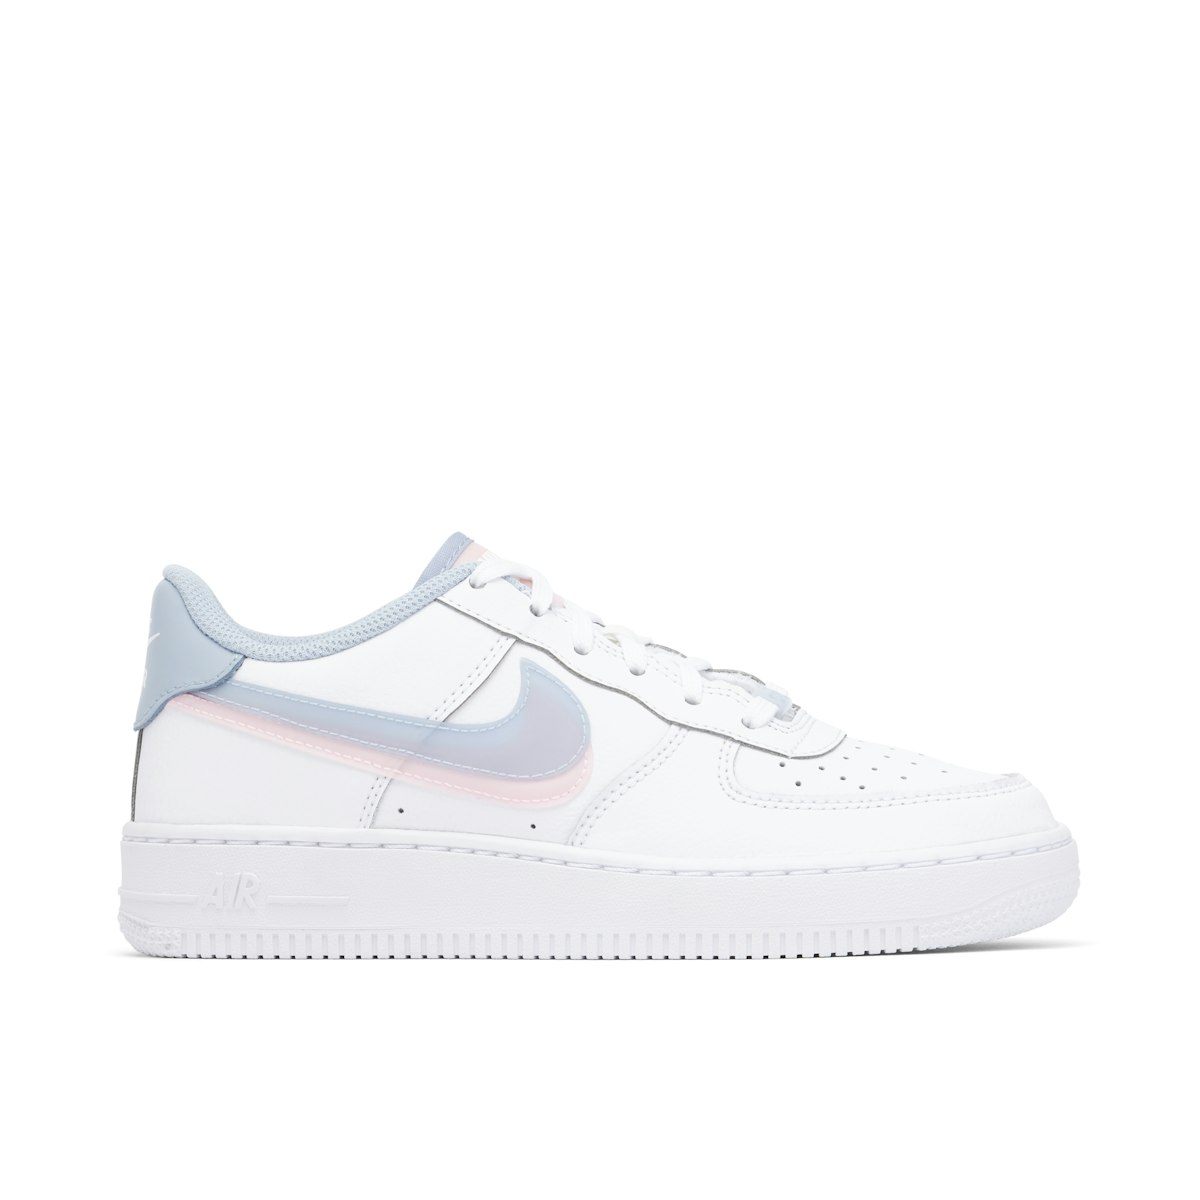 Nike Air Force 1 Low LV8 Double Swoosh Blue Pink (GS) - CW1574-100